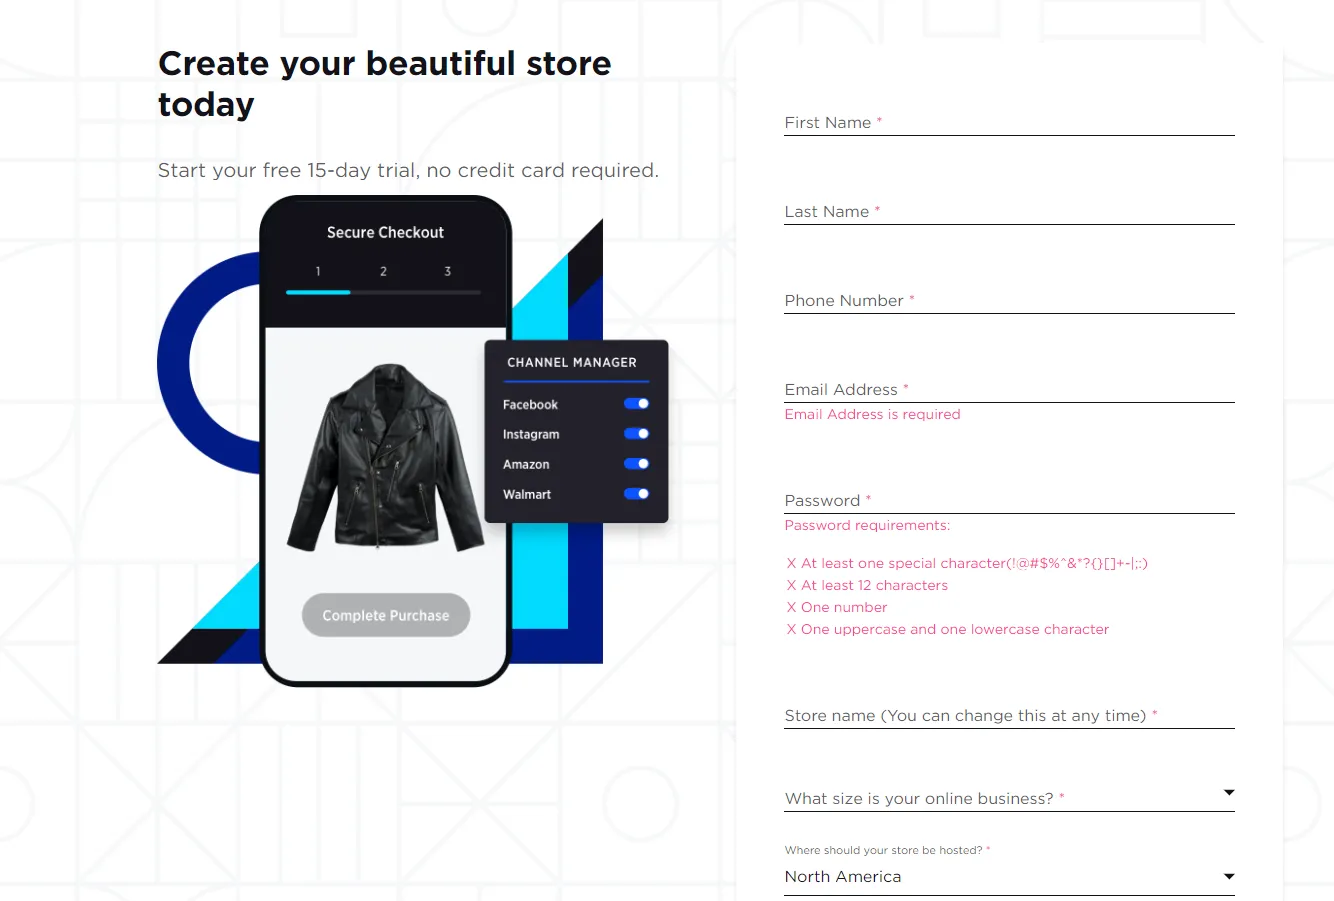 Launch your BigCommerce store